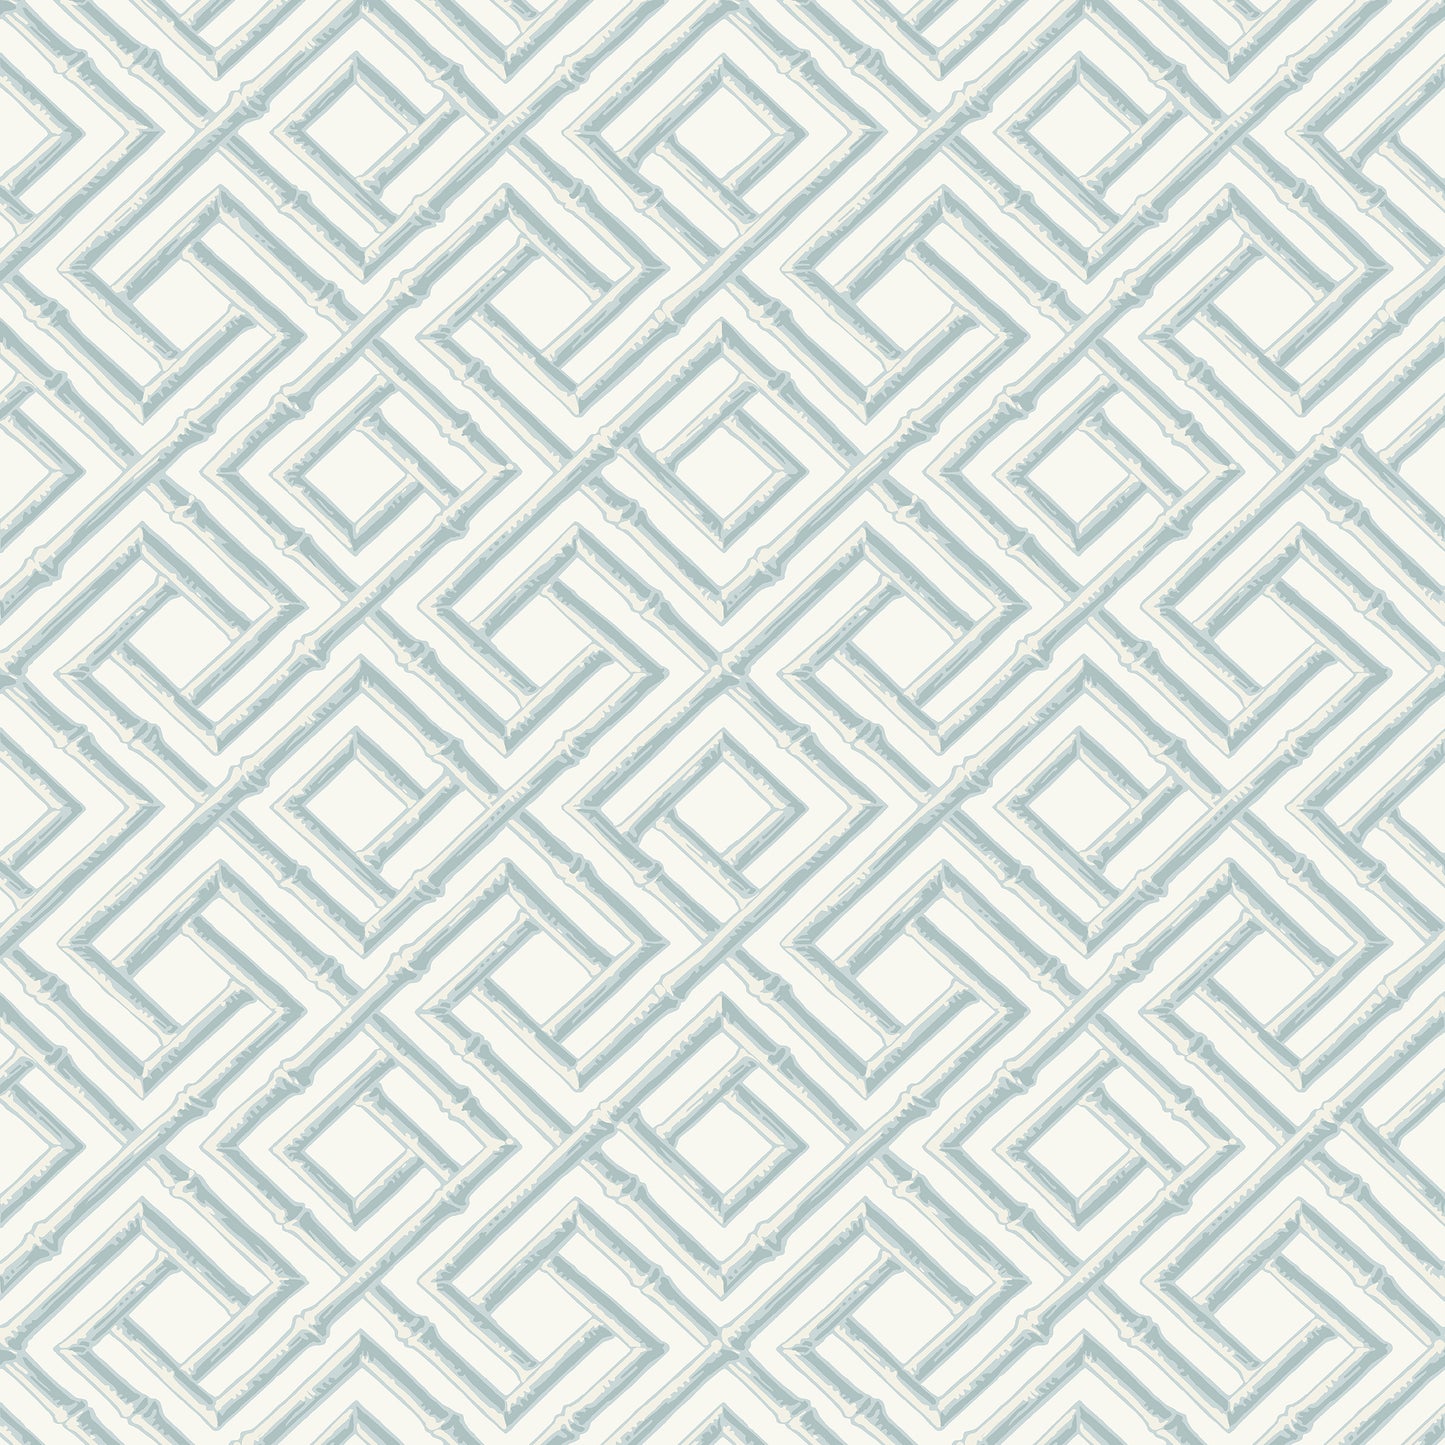 Purchase Thibaut Wallpaper Product# T42050 pattern name French Lattice color Spa Blue. 